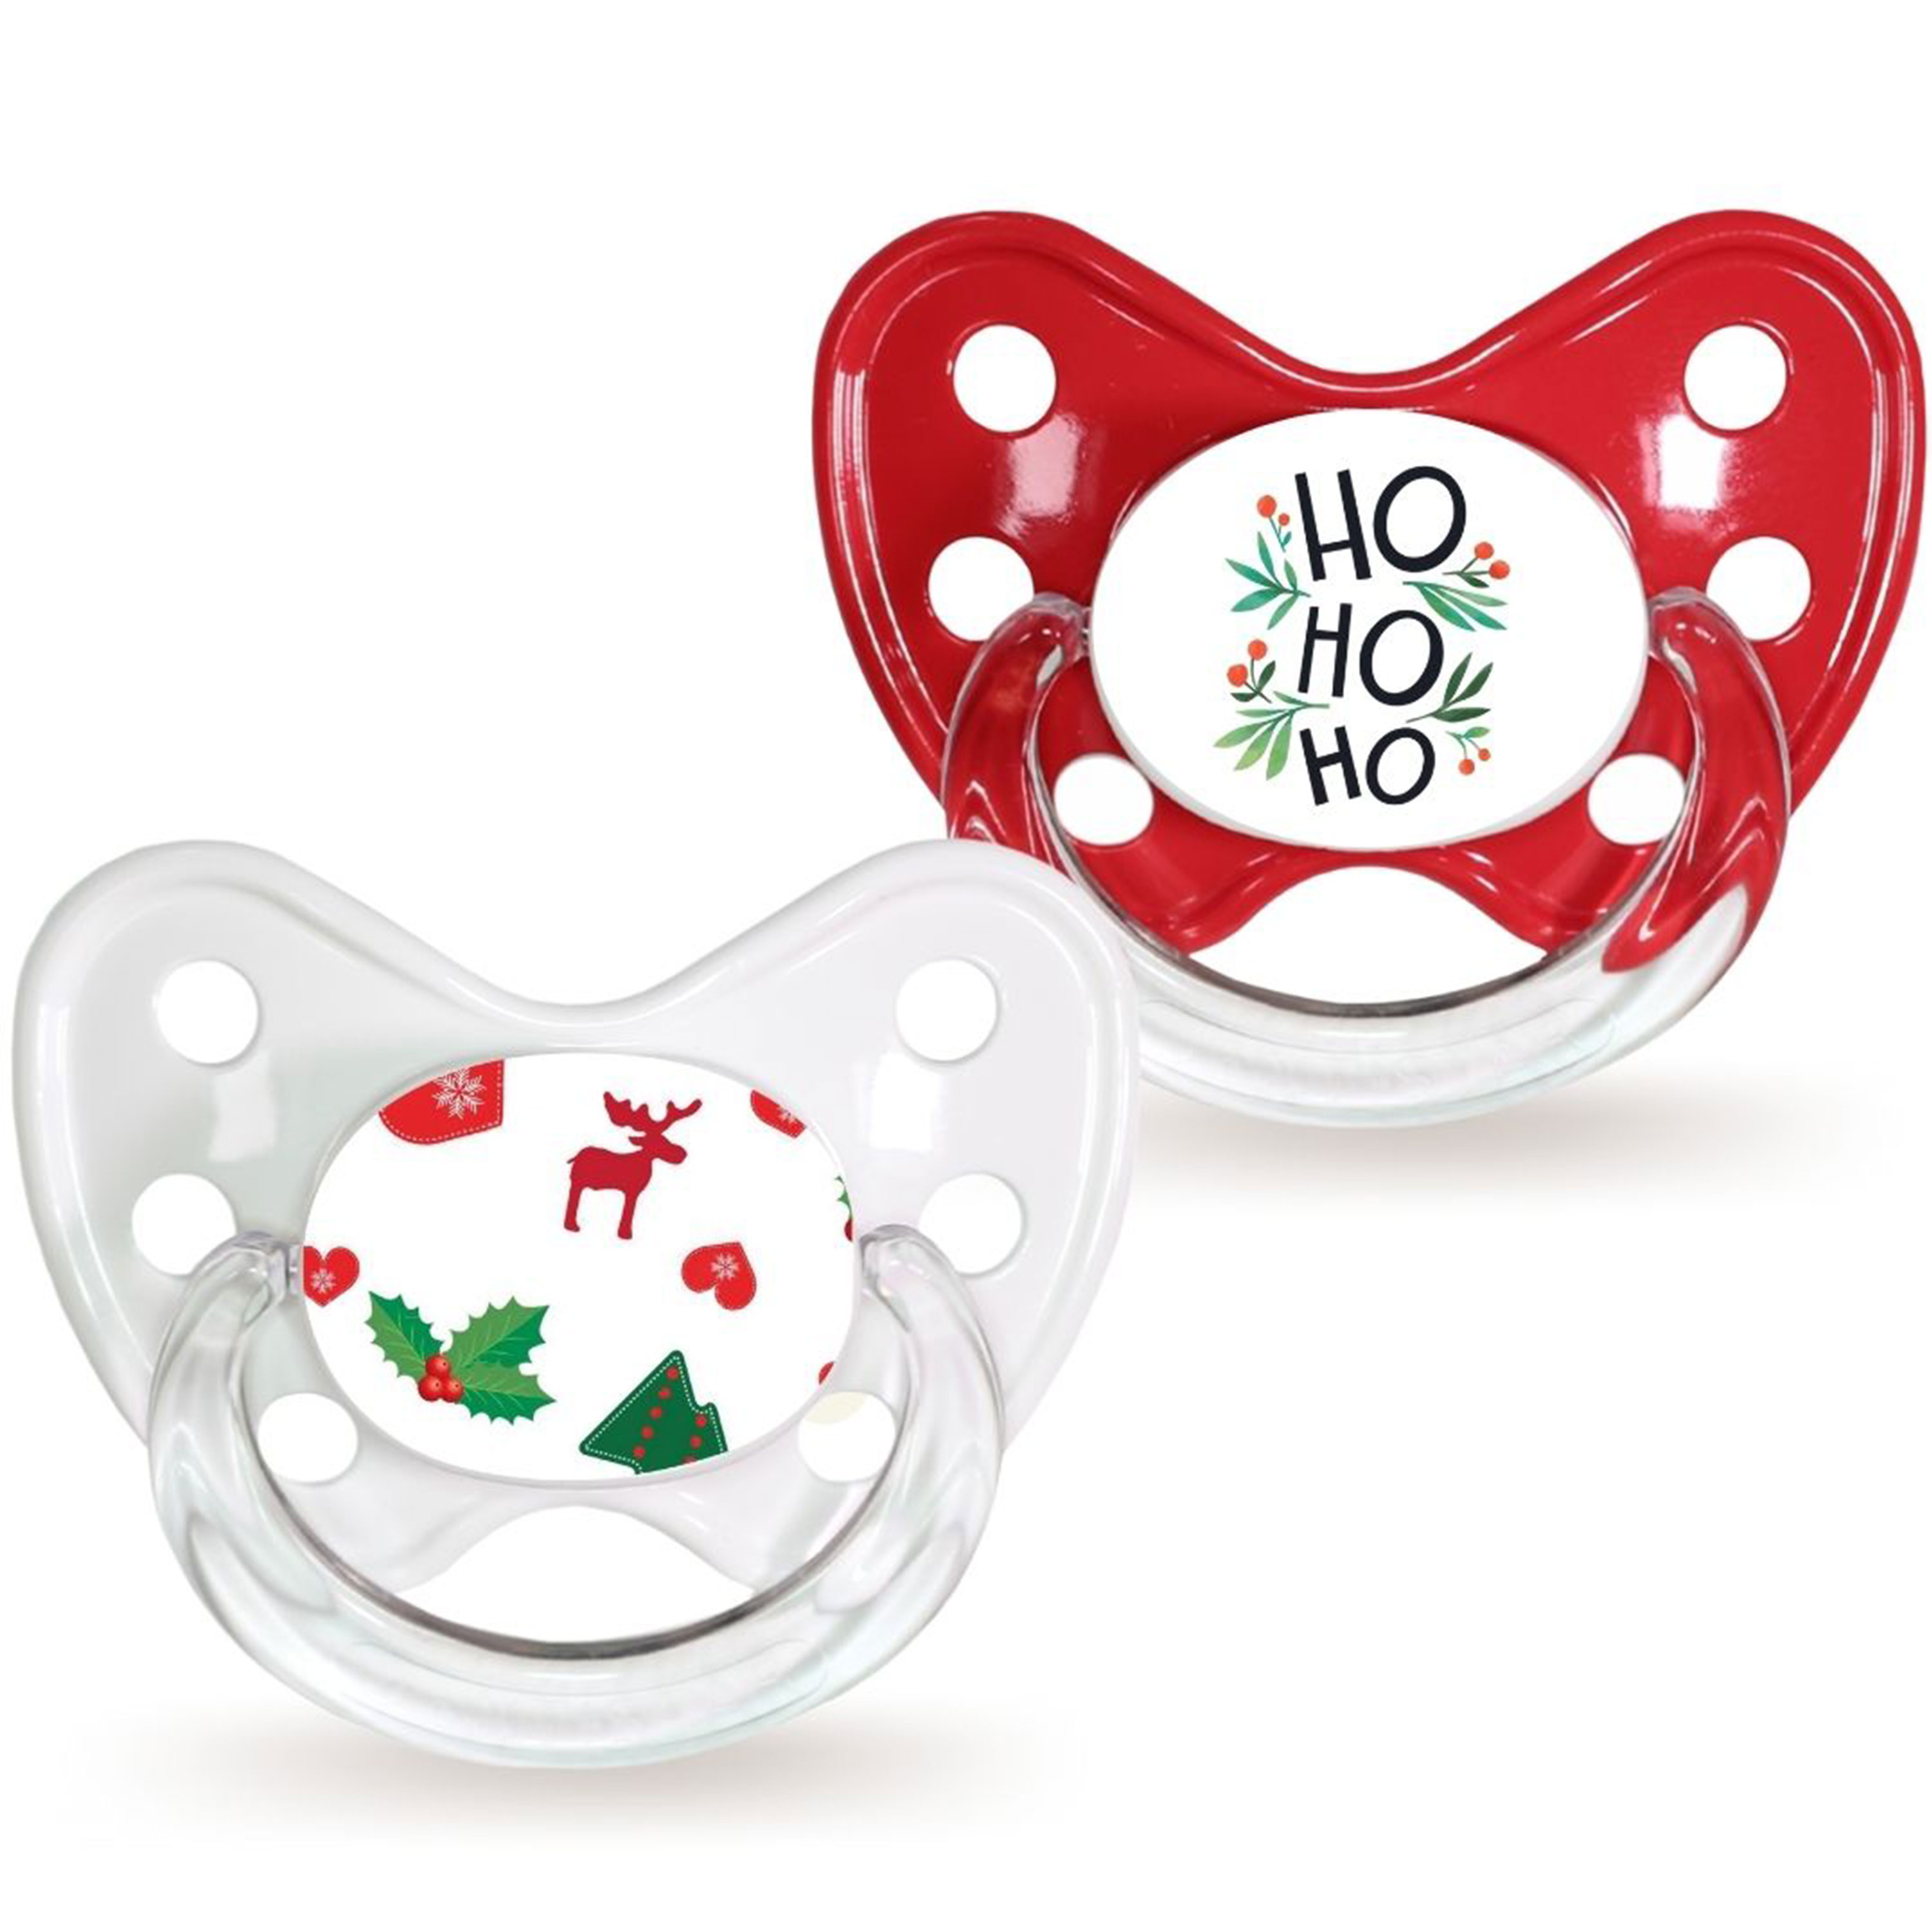 Soother Set Santa Claus and Reindeer